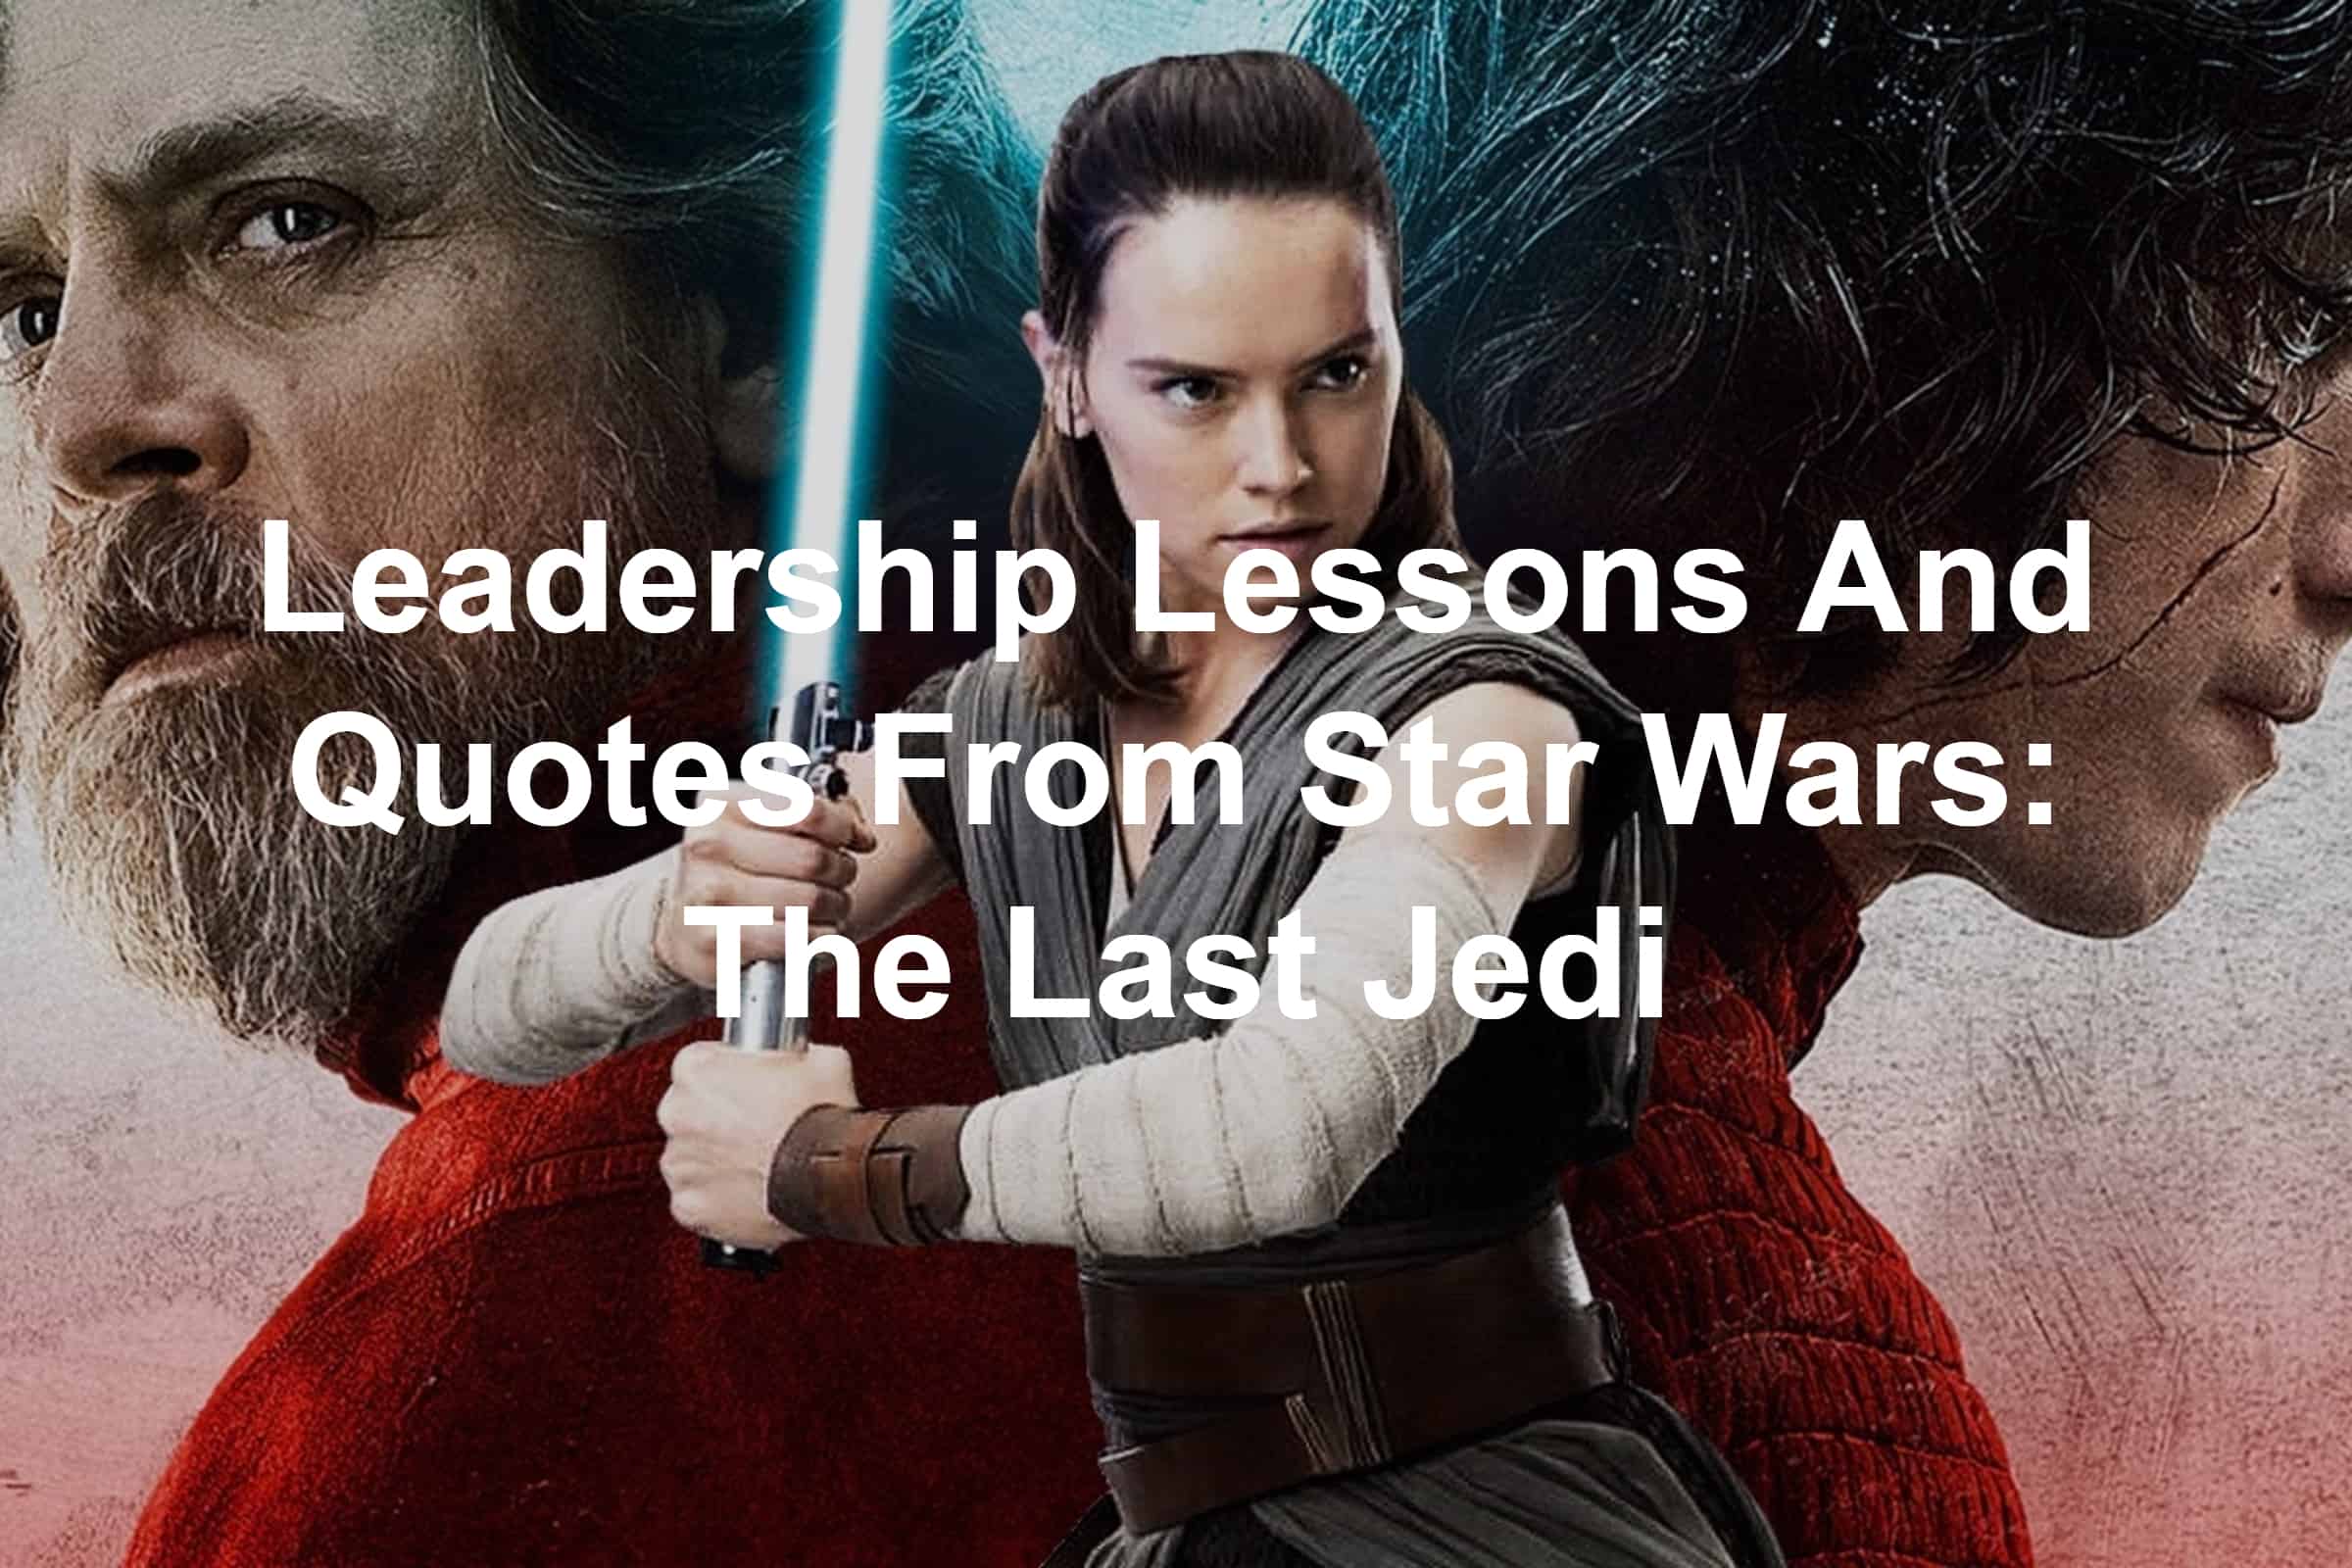 Leadership Lessons And Quotes From Star Wars: The Last Jedi